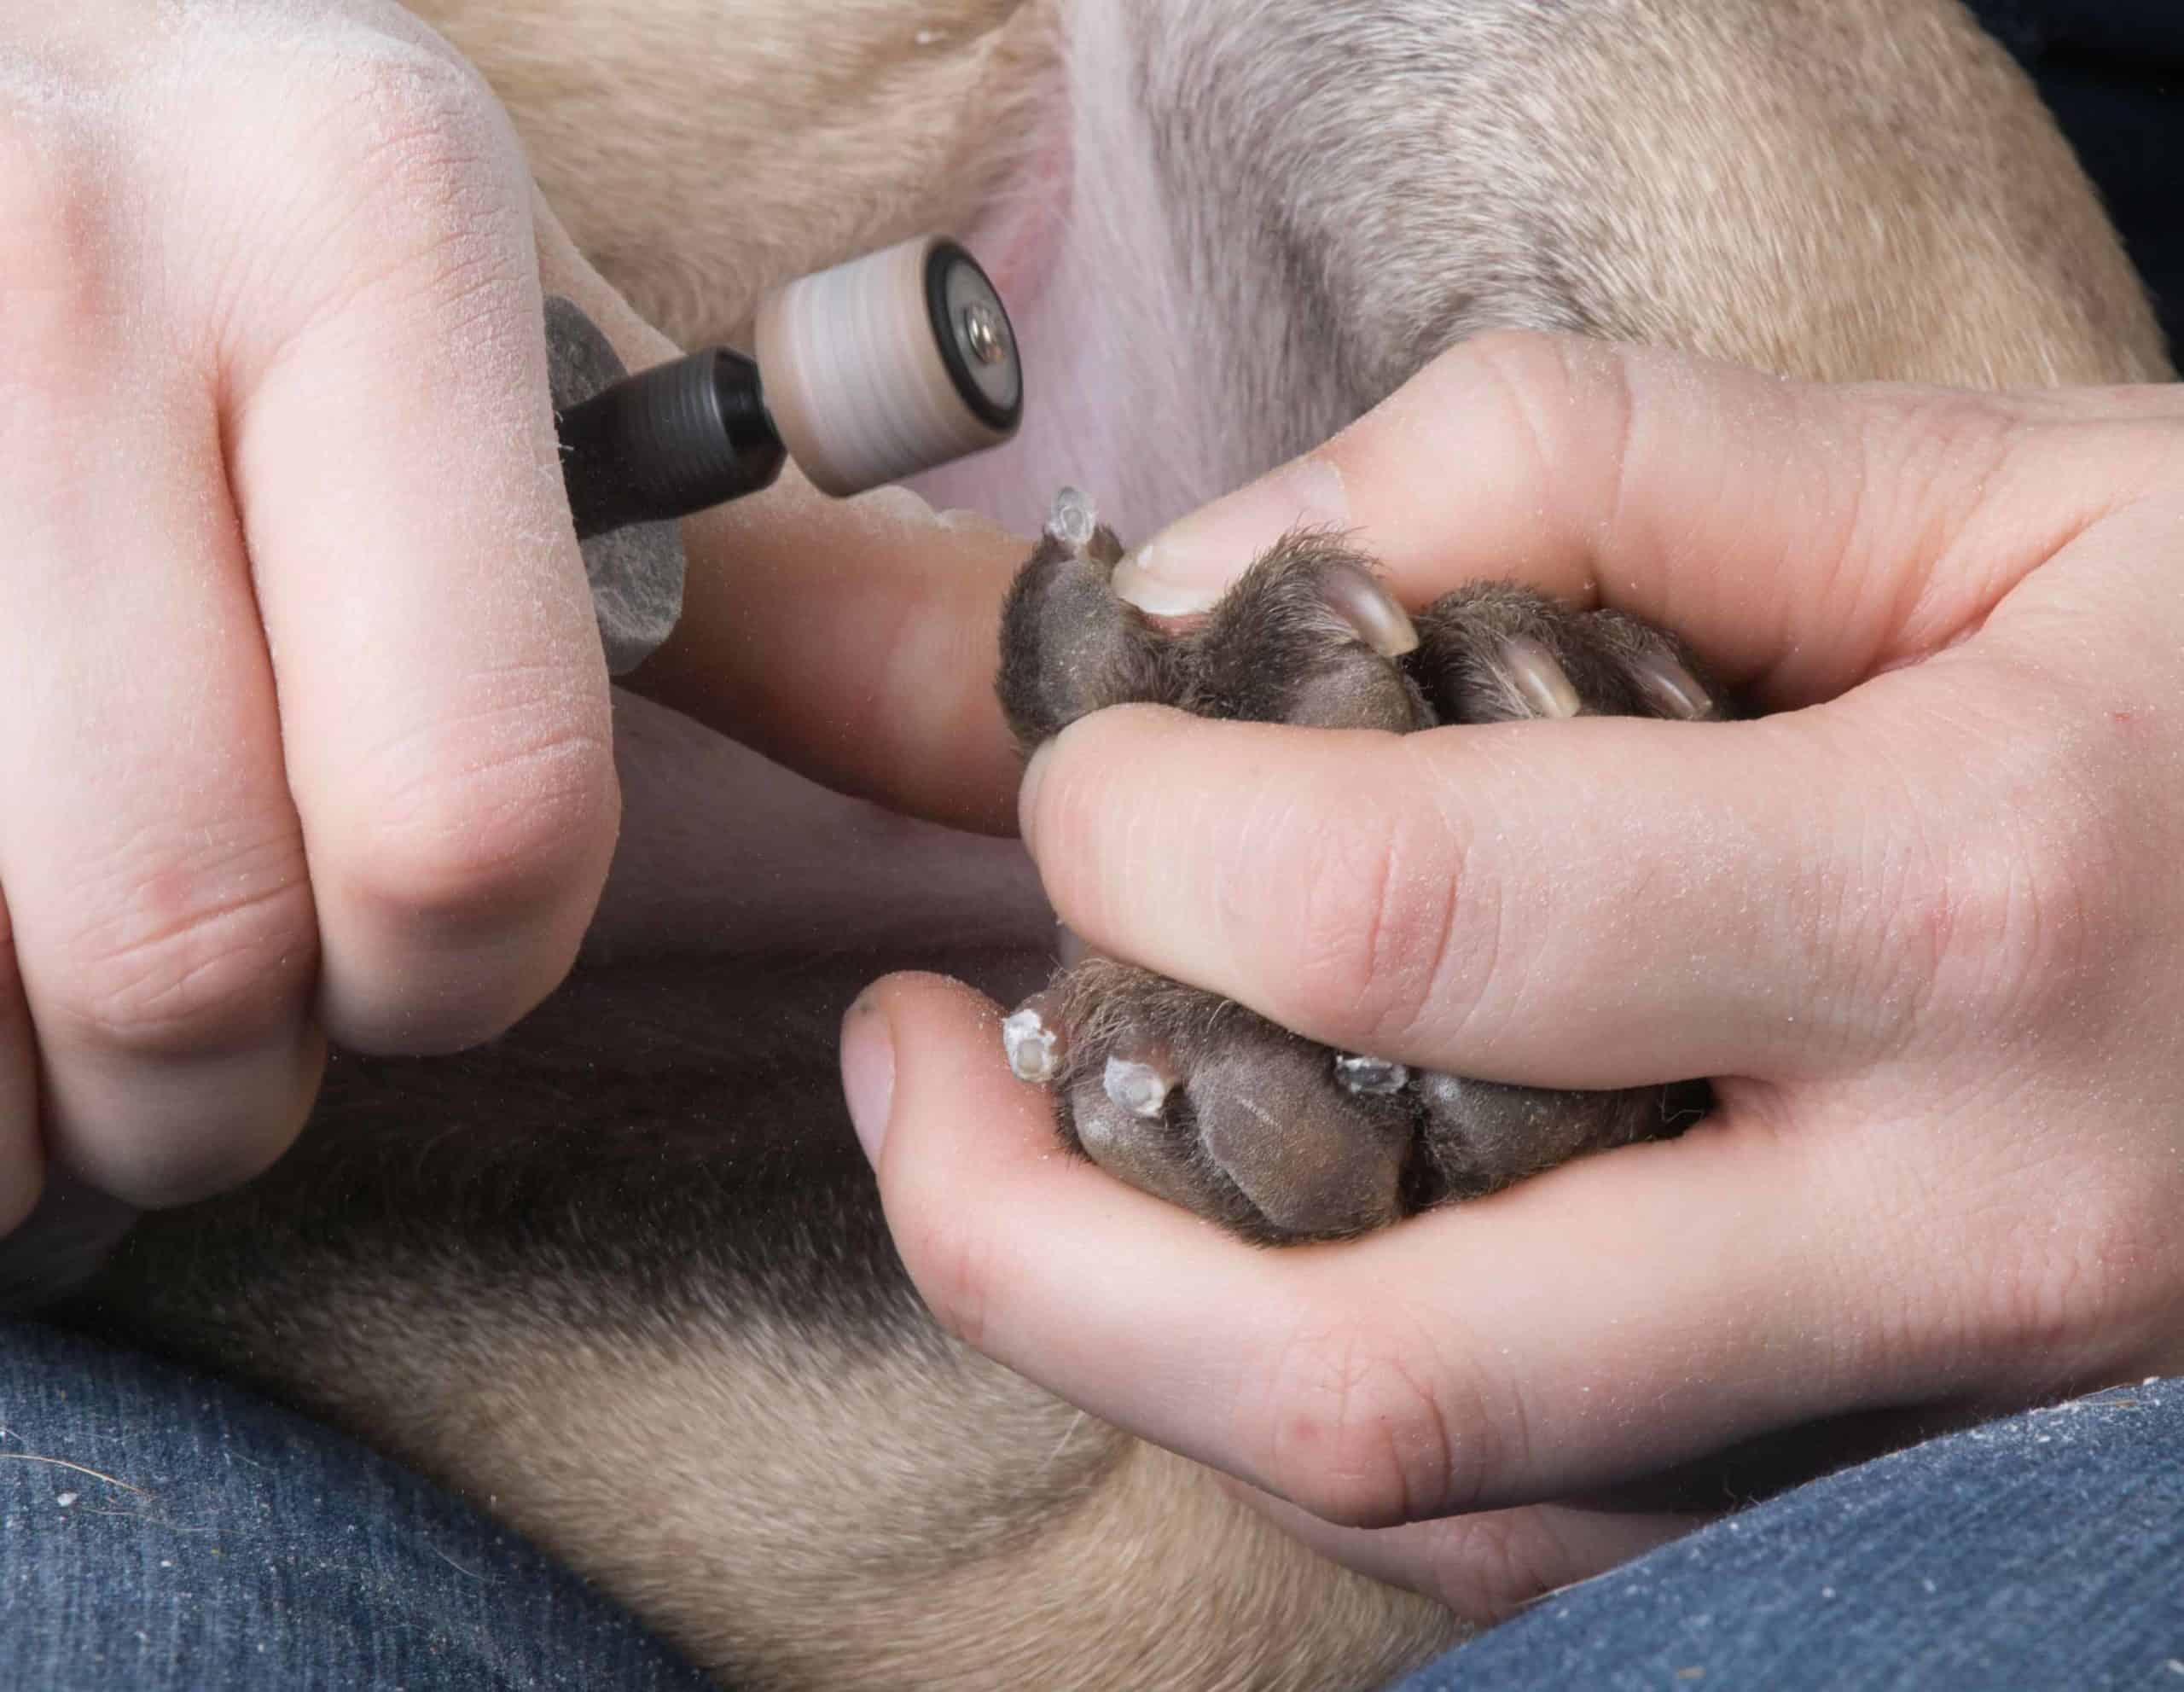 Owner uses nail grinder to trim dog's nails. Try trimming your dog's nails while it's sleeping. Be cautious, dogs' feet are sensitive even when sleeping.